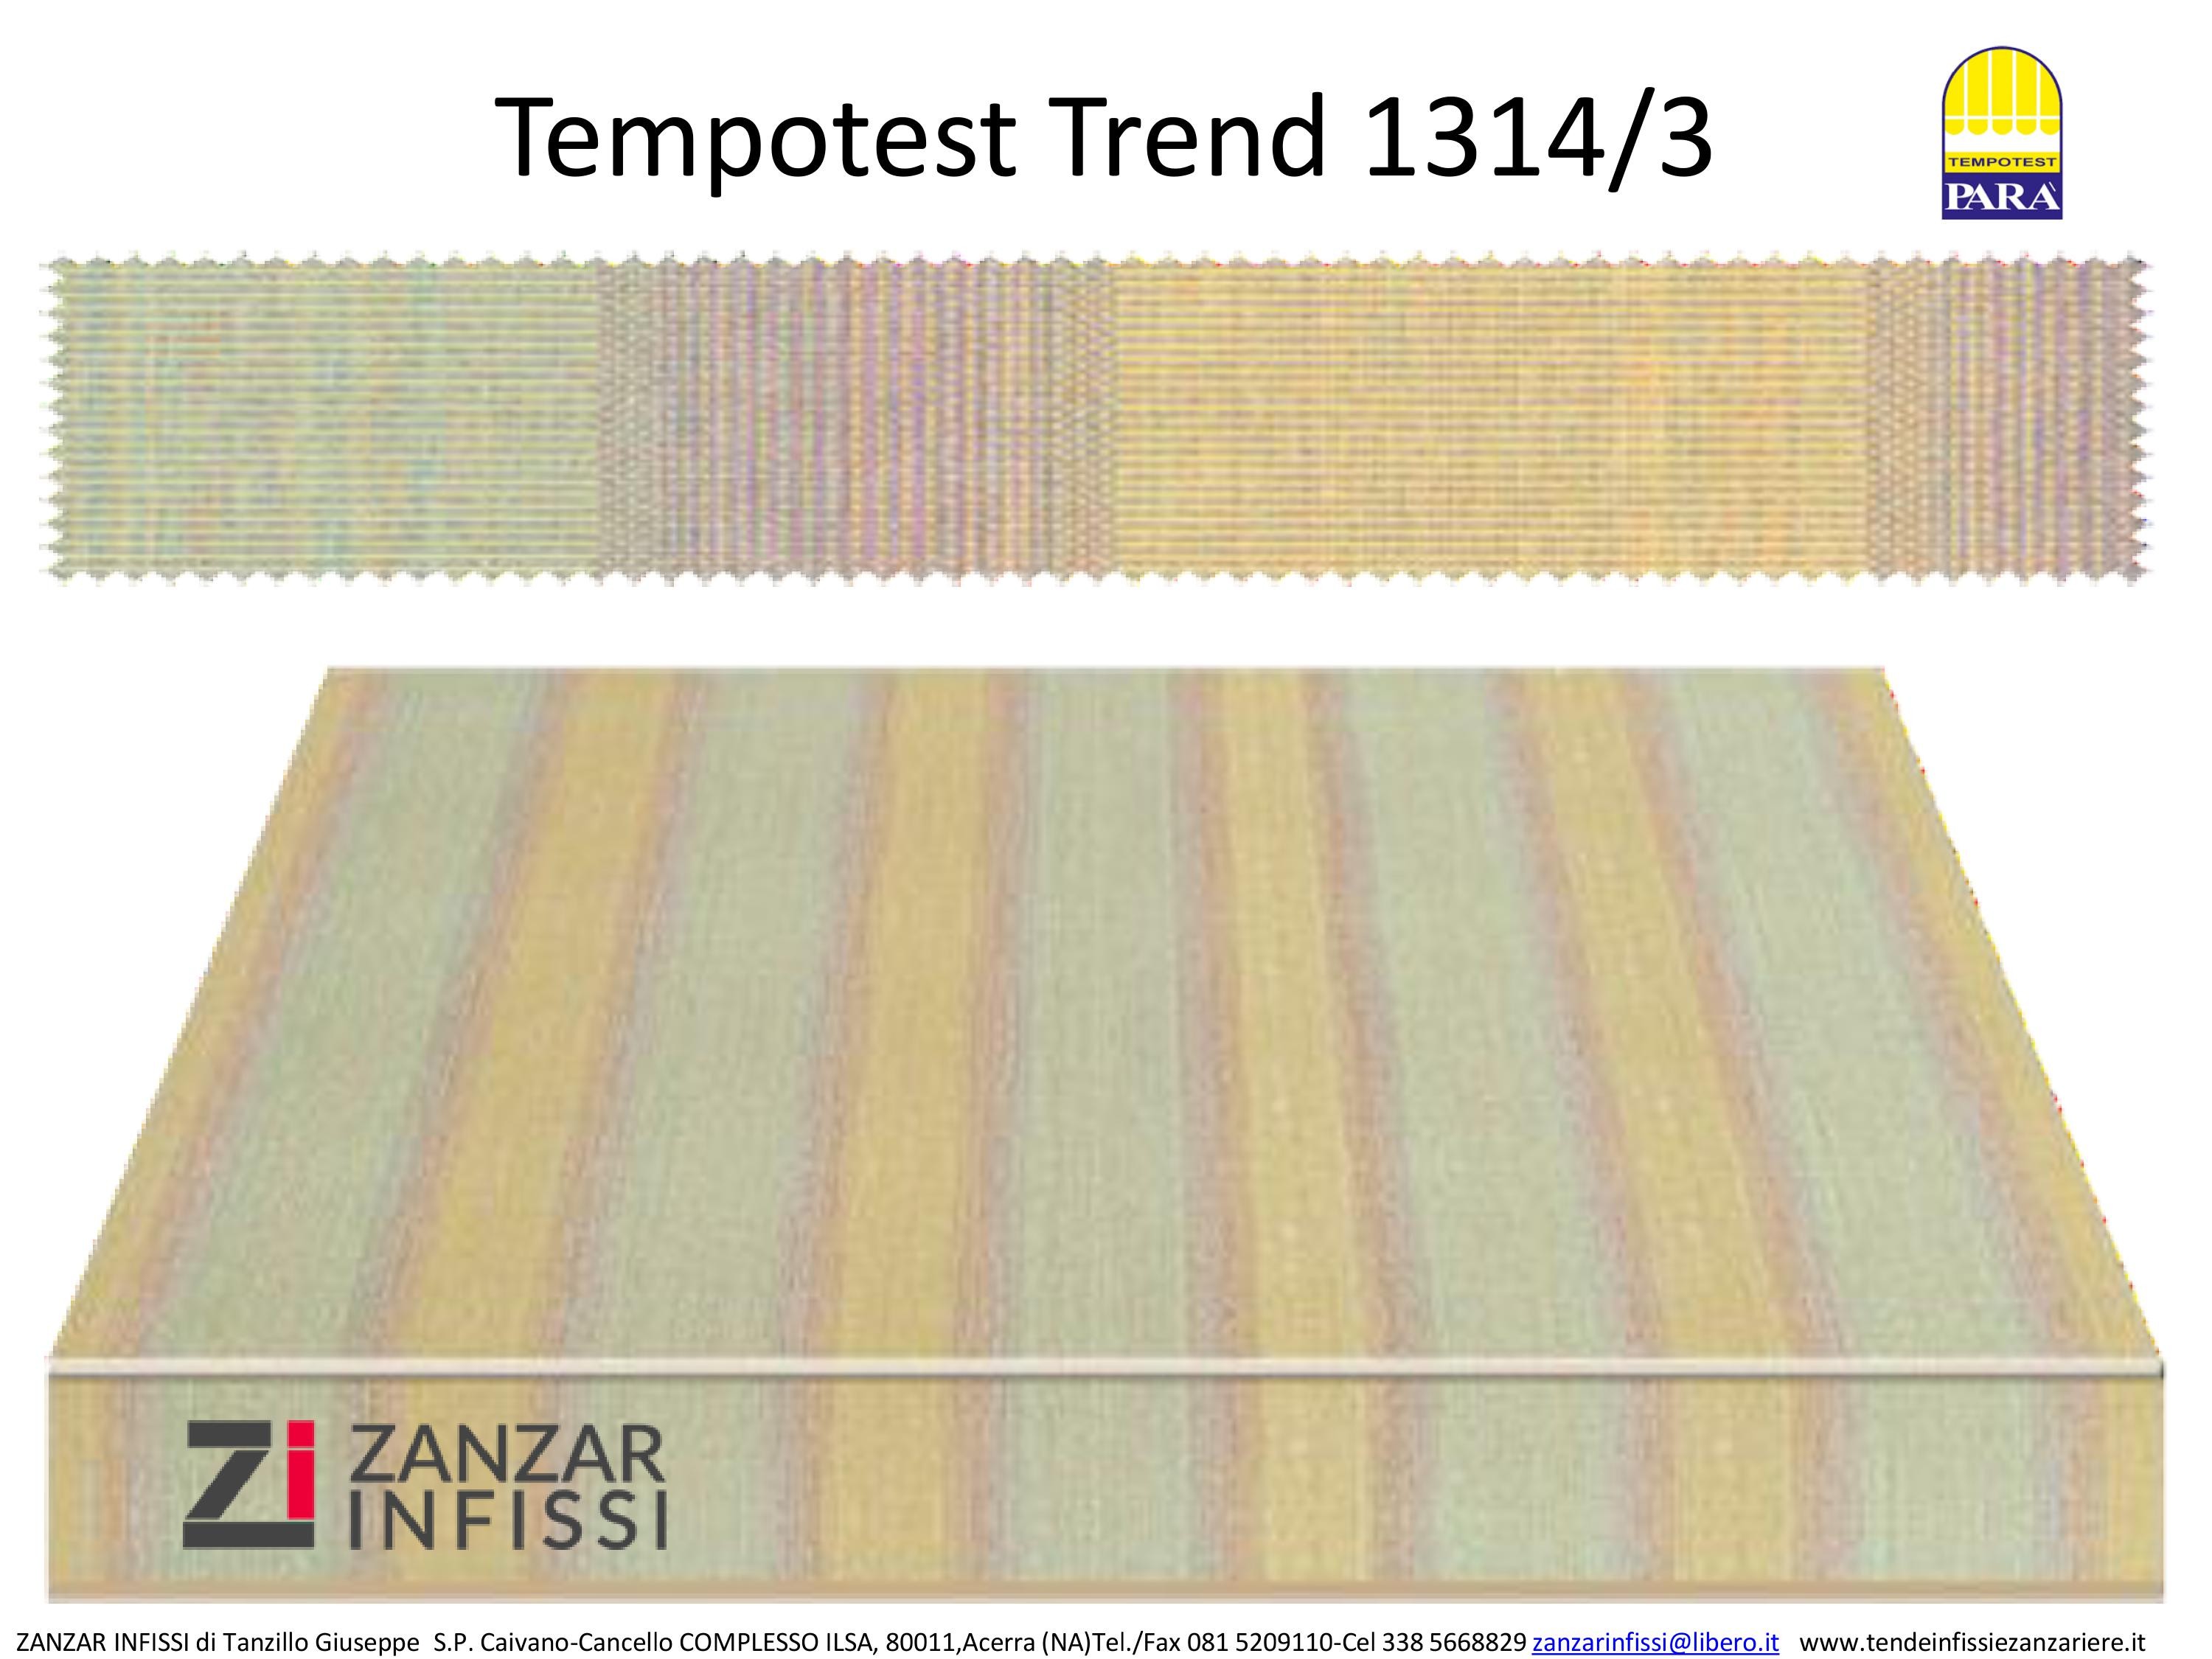 Tempotest 1314/3